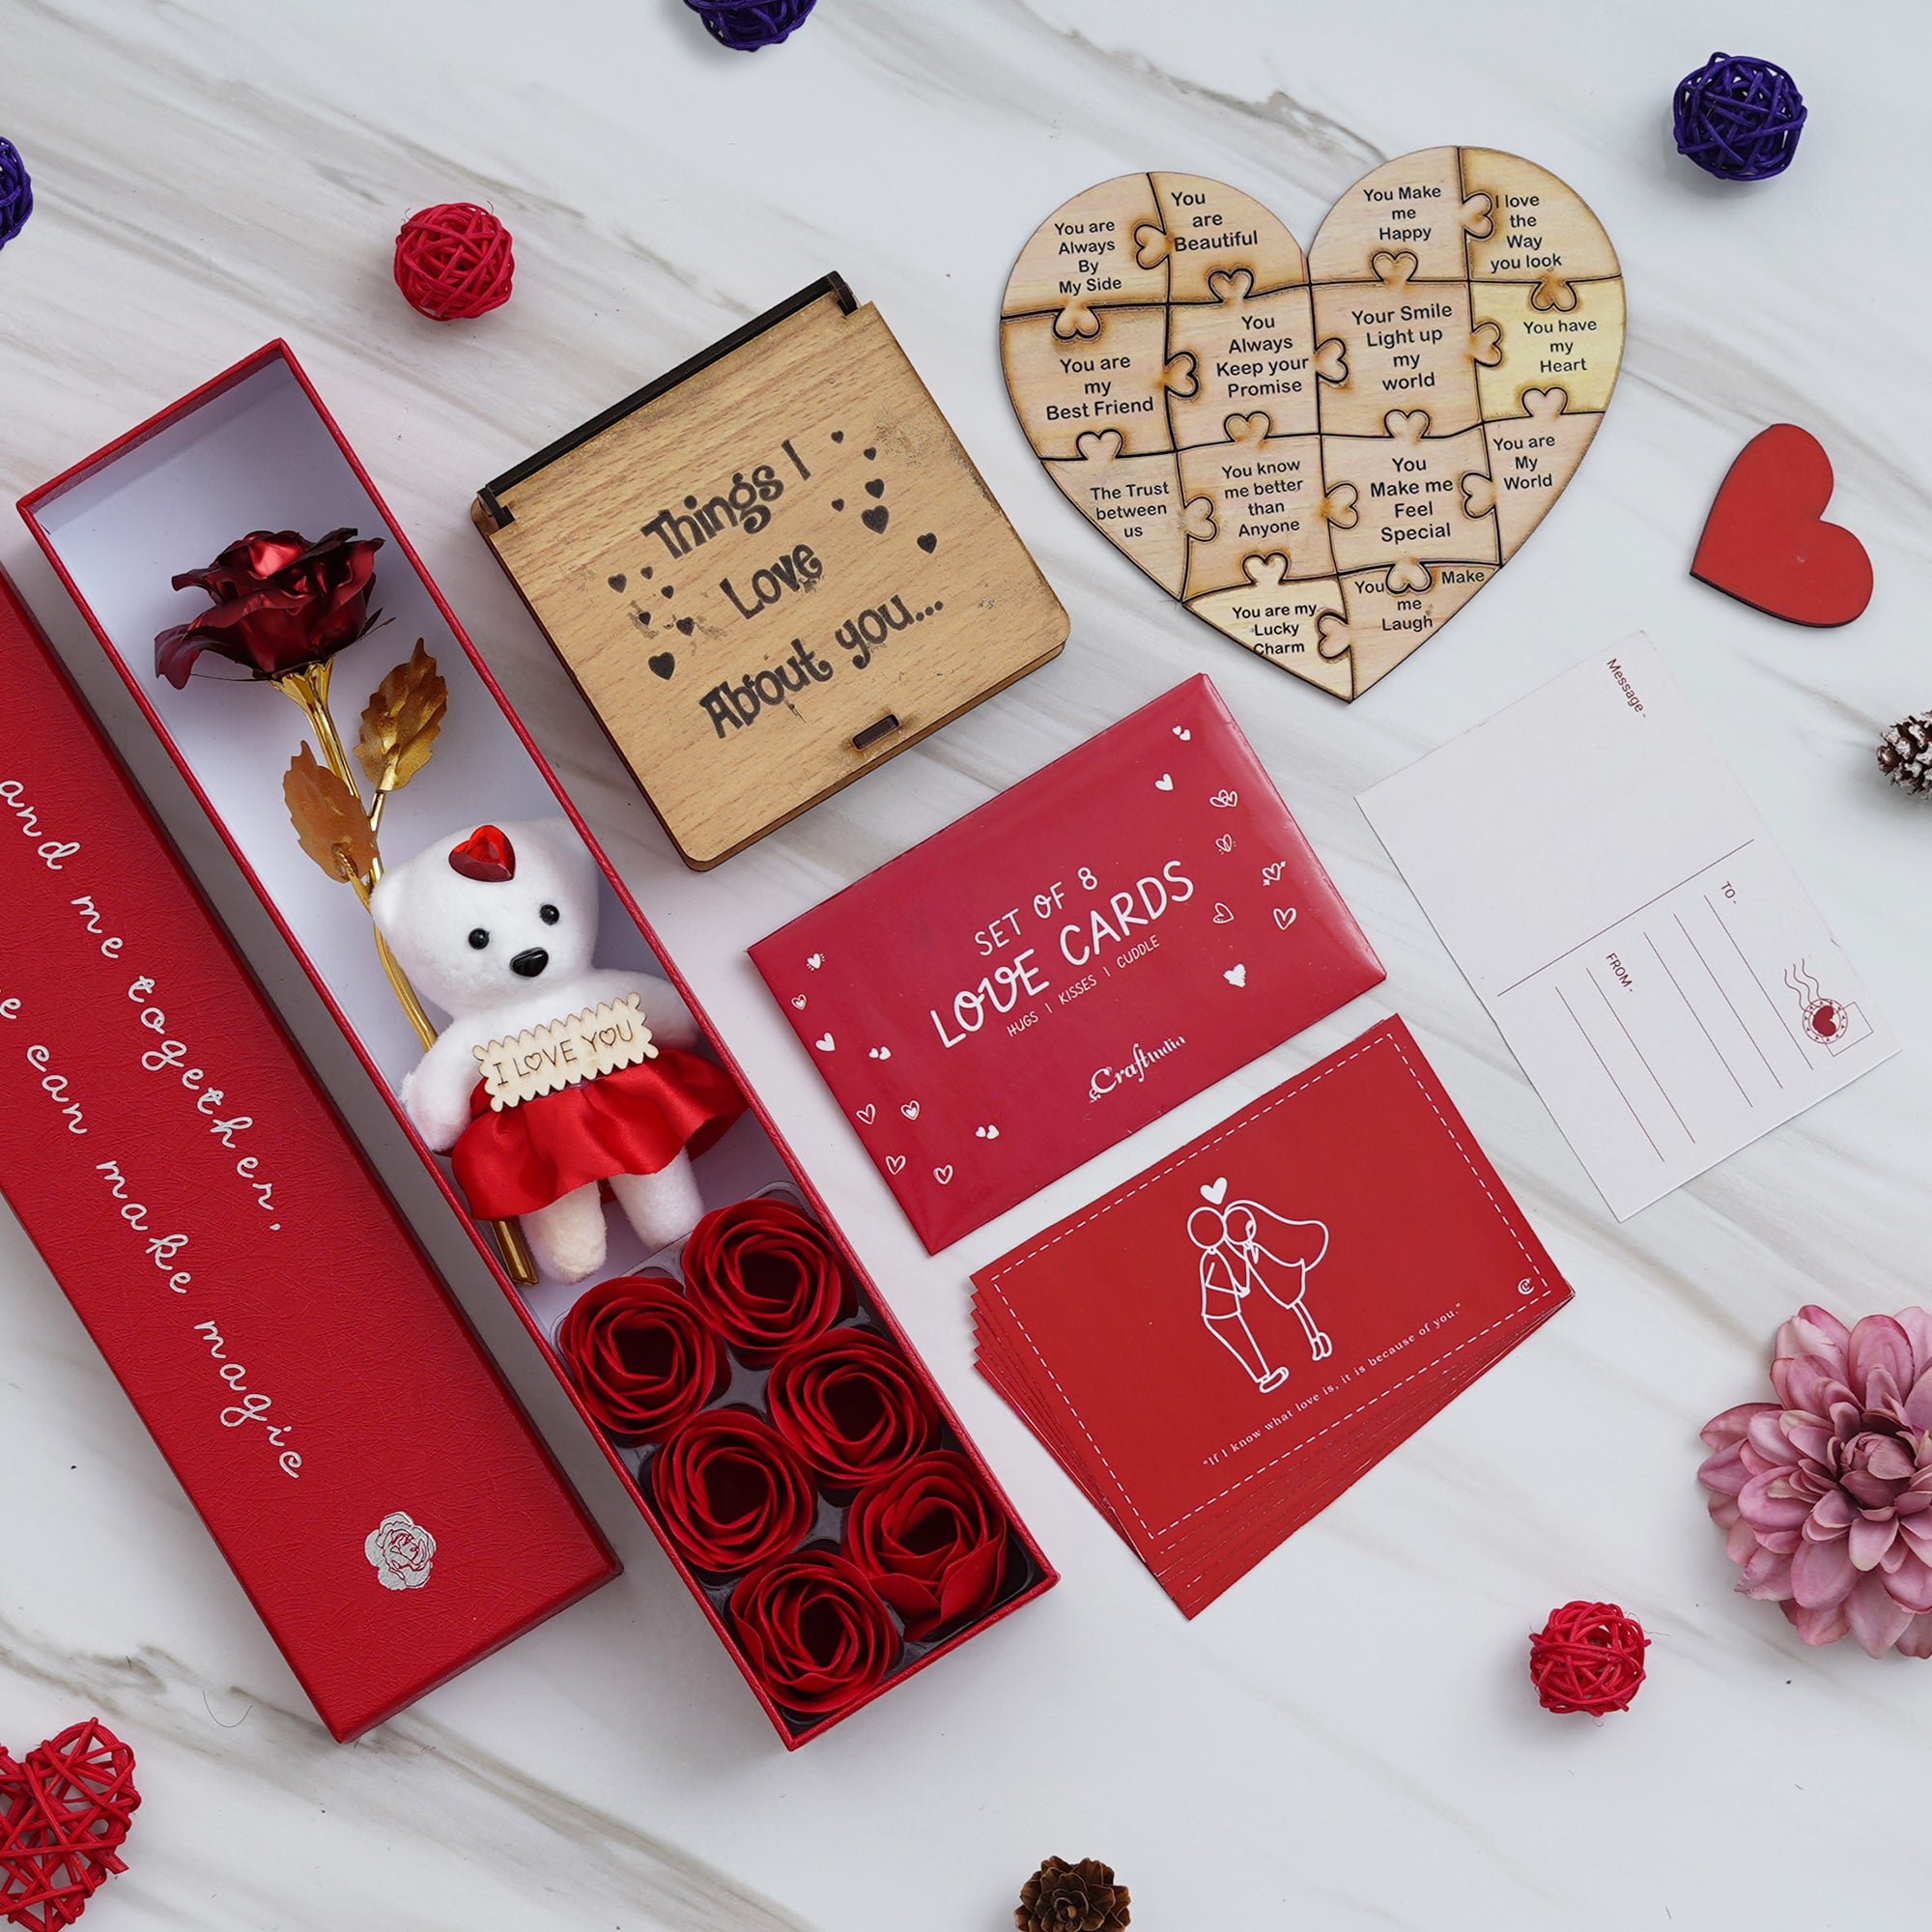 Valentine Combo of Pack of 8 Love Gift Cards, Red Gift Box with Teddy & Roses, "Things I Love About You" Puzzle Wooden Gift Set